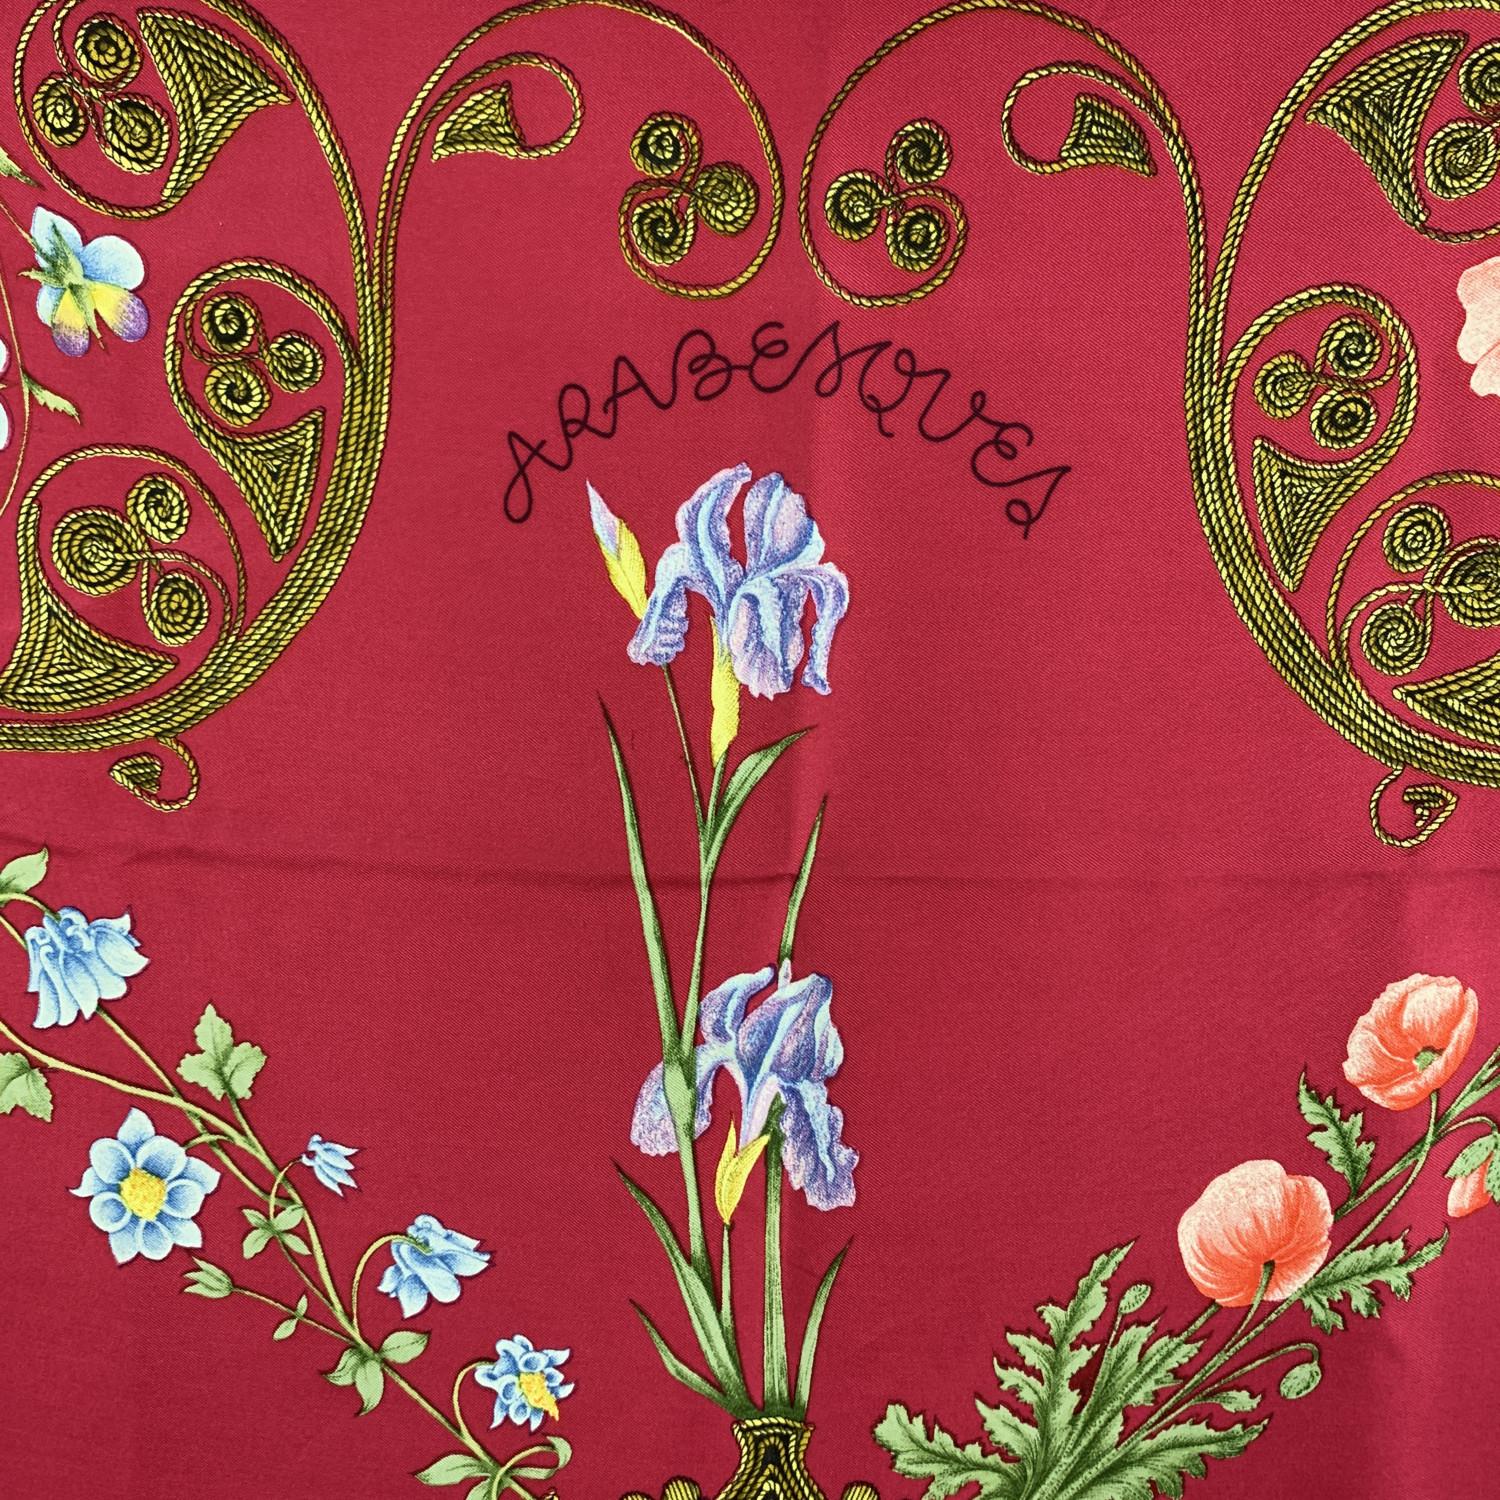 HERMES silk scarf named 'Arabesques ', by Henri d'Origny designed - first issued in 1963. 100% Silk. Multicolor floral design with magenta background and purple borders. Measurements: Approx 35 x 35 inches. 'HERMES PARIS' printed in the bottom